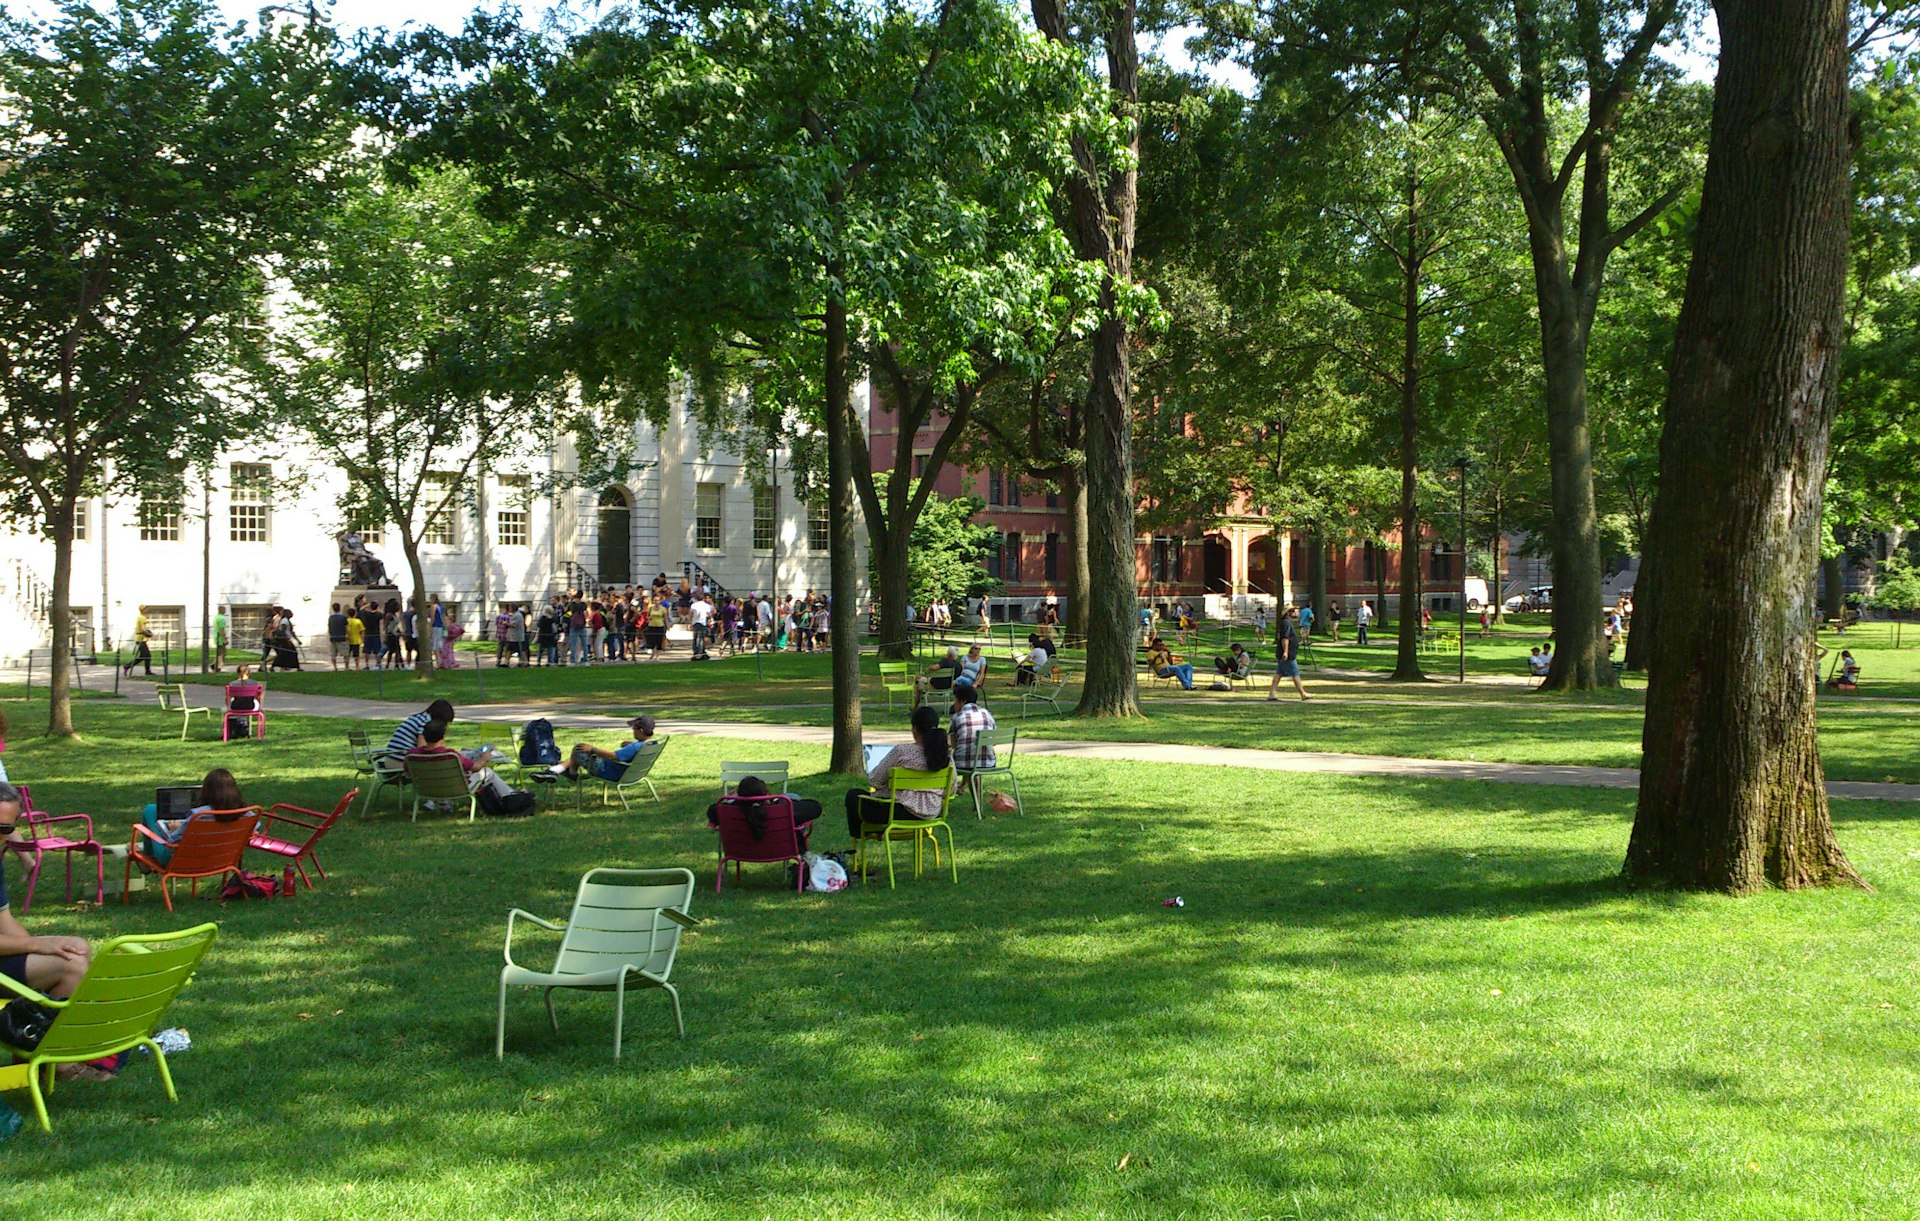 Laze about with the students of Harvard Yard. Image by Anne Roth / CC BY 2.0